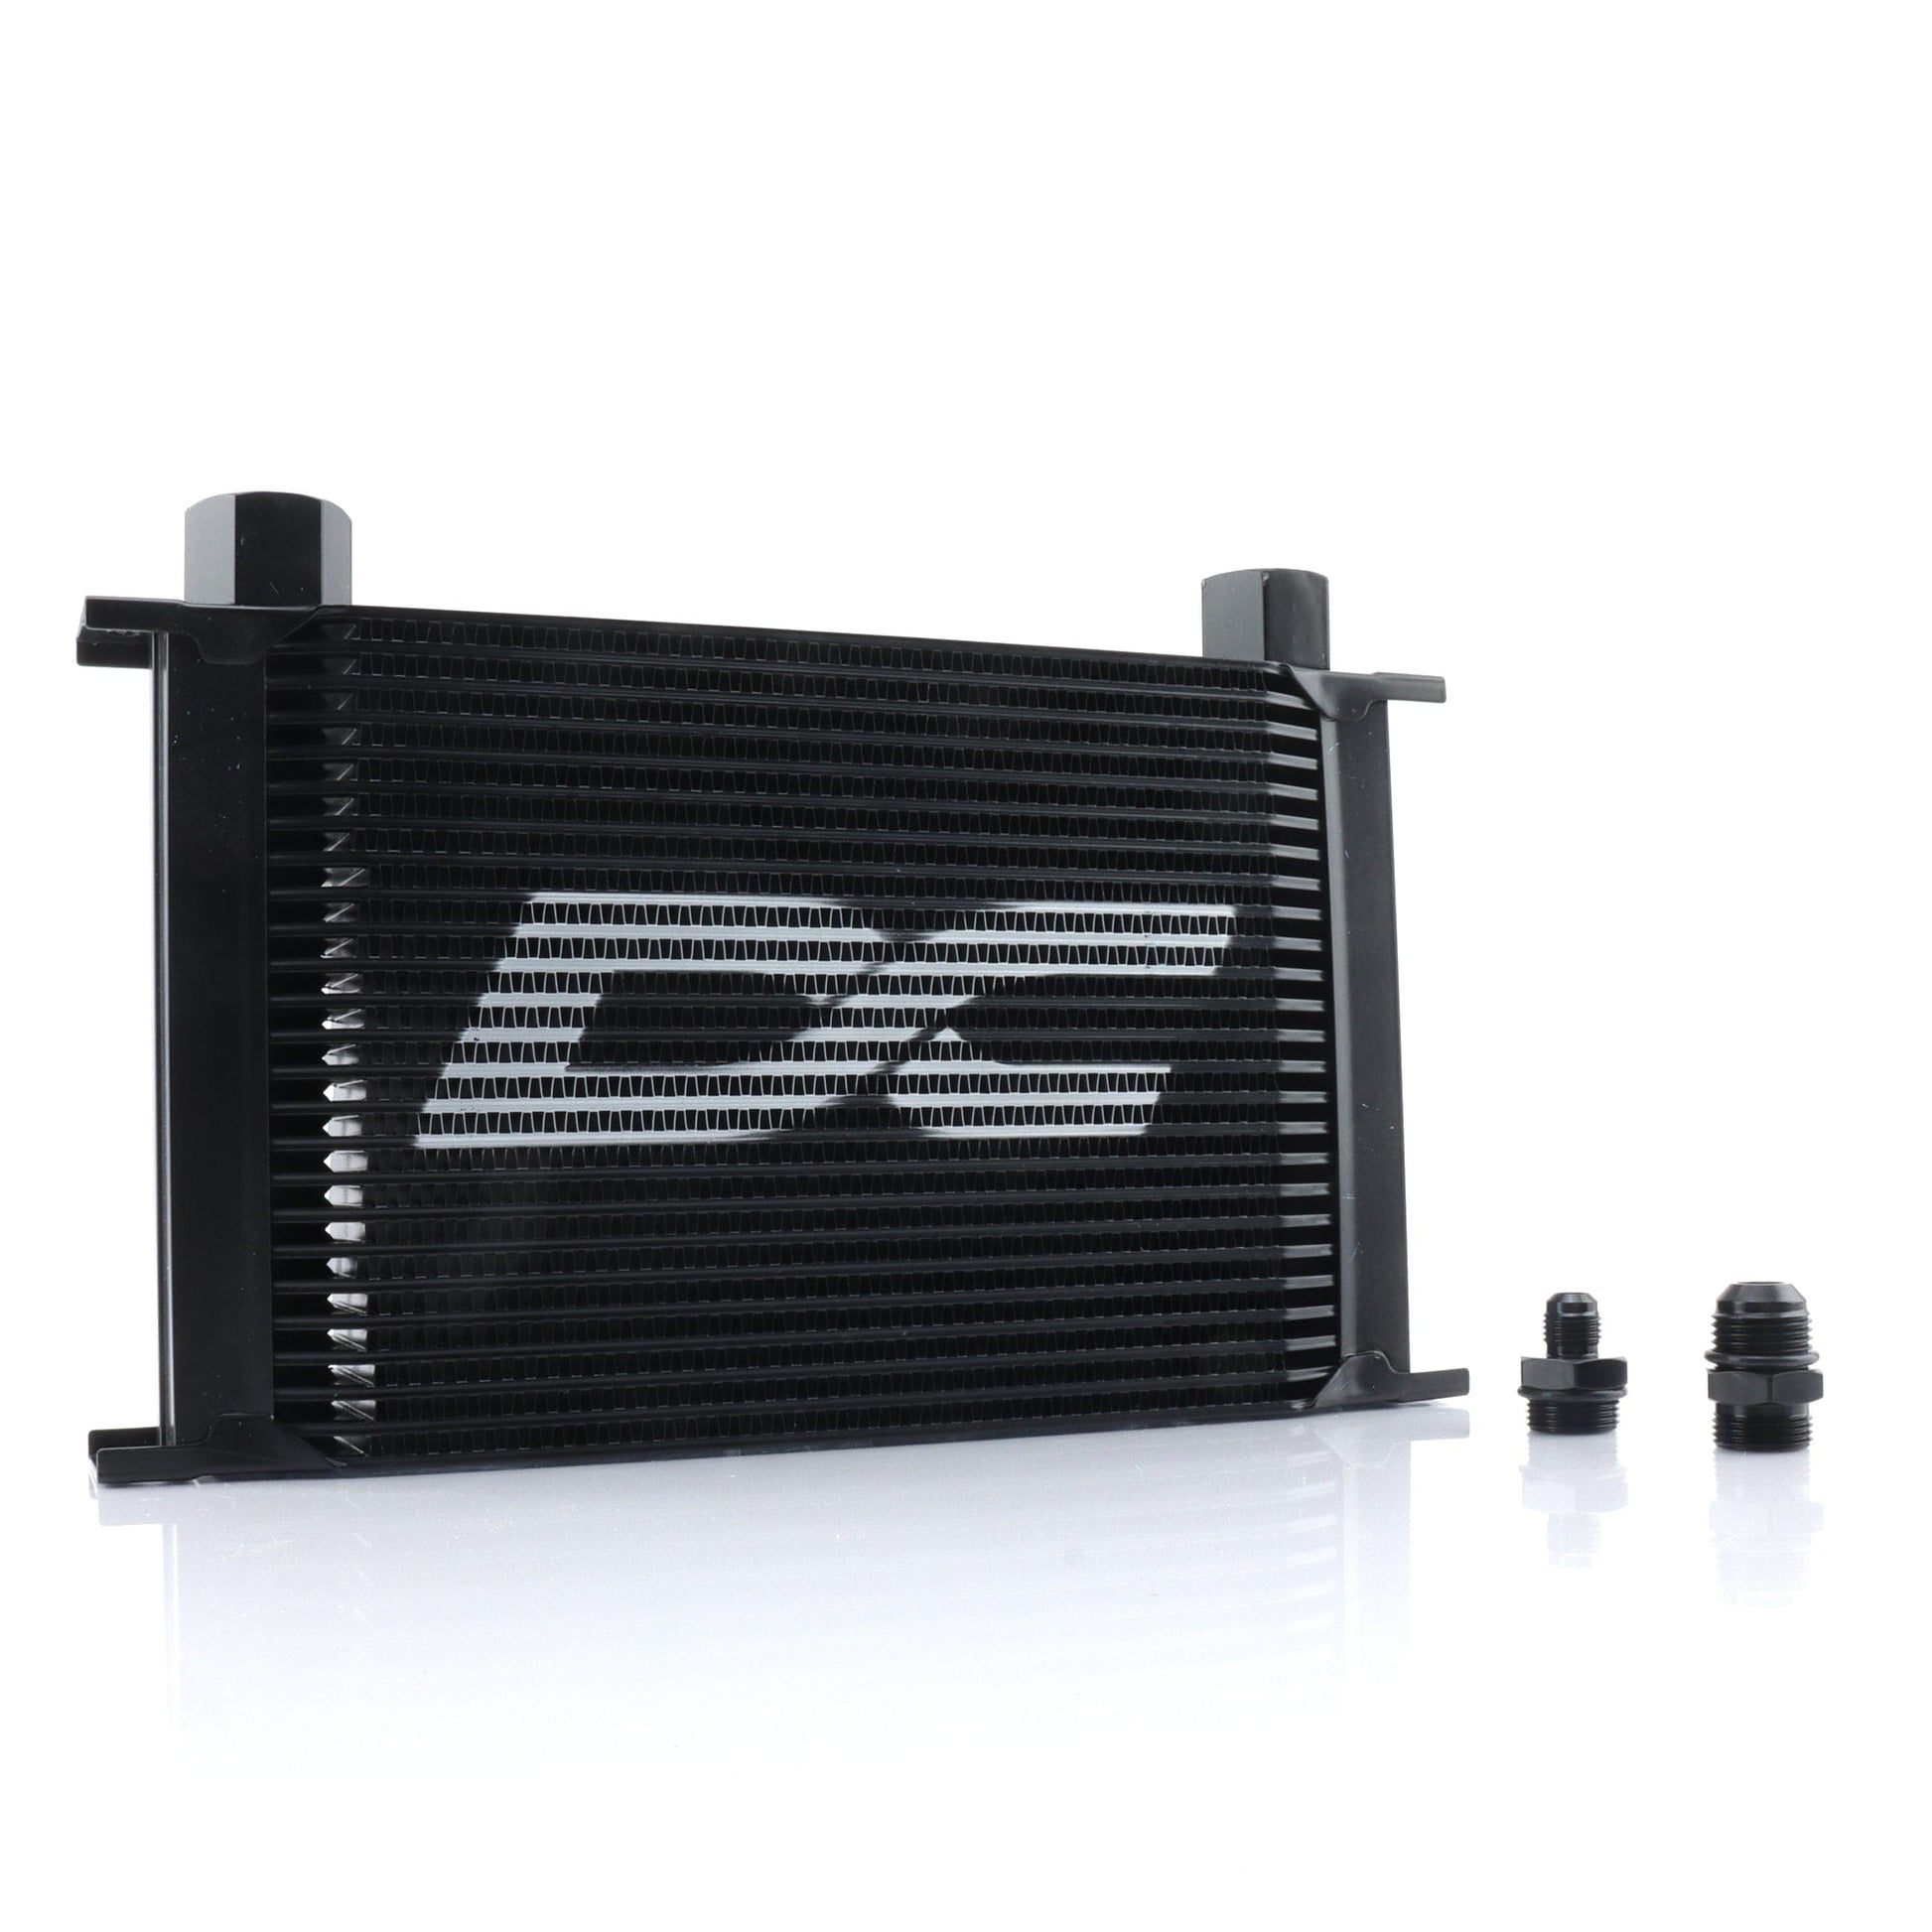 DC Sports Oil Cooler -6 Fittings DC SPORTS 25 ROW UNIVERSAL OIL COOLER; BLACK